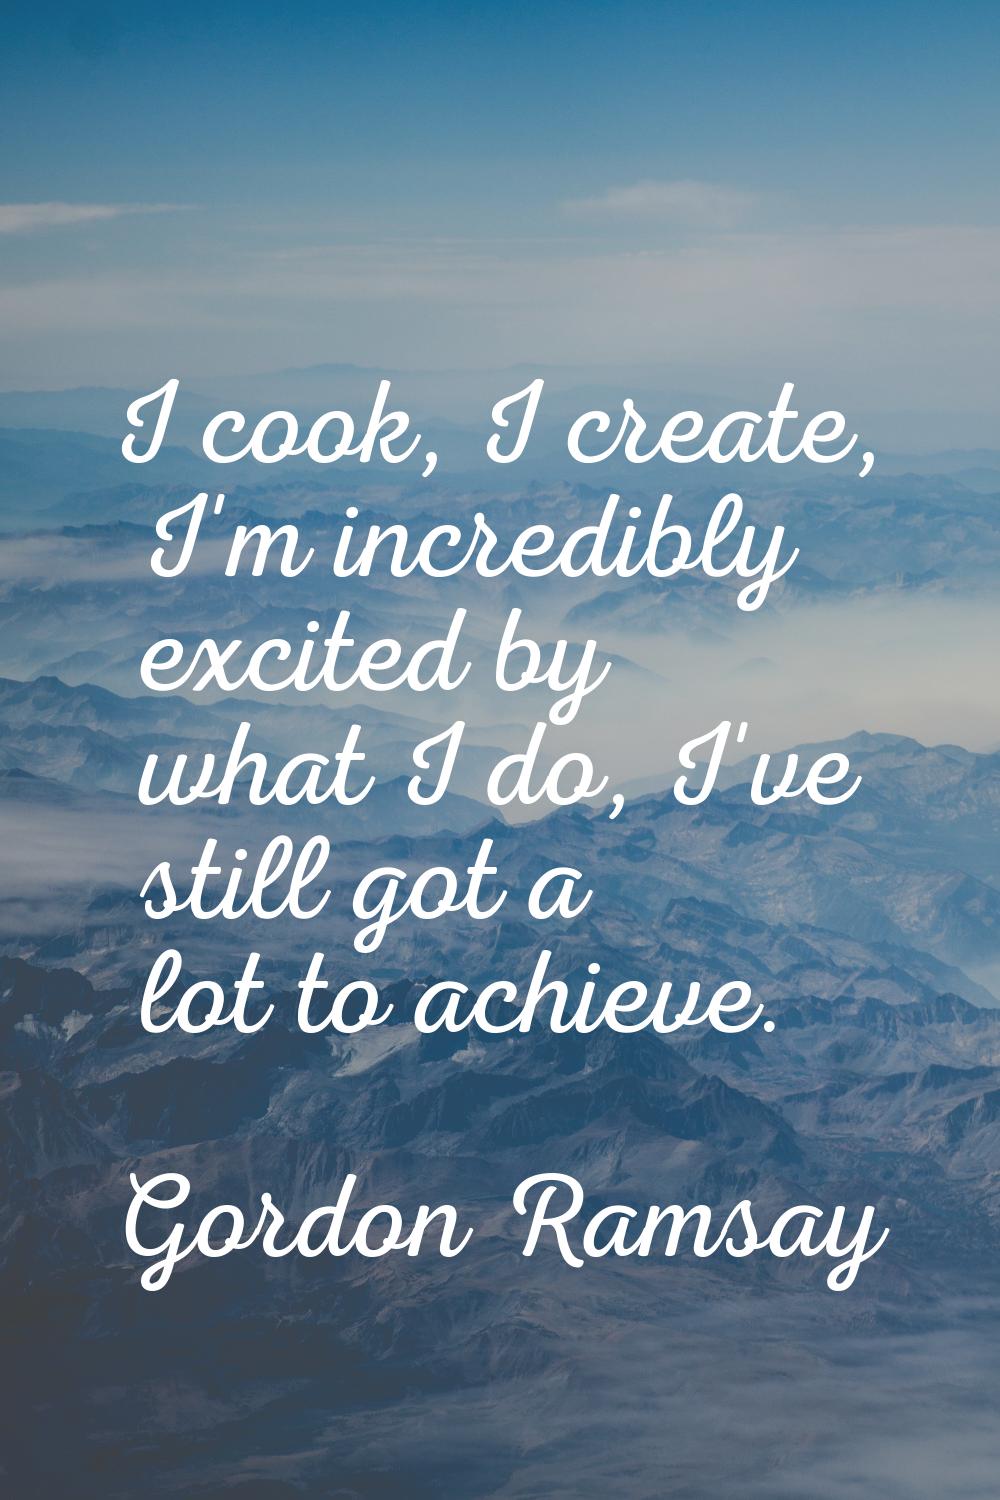 I cook, I create, I'm incredibly excited by what I do, I've still got a lot to achieve.